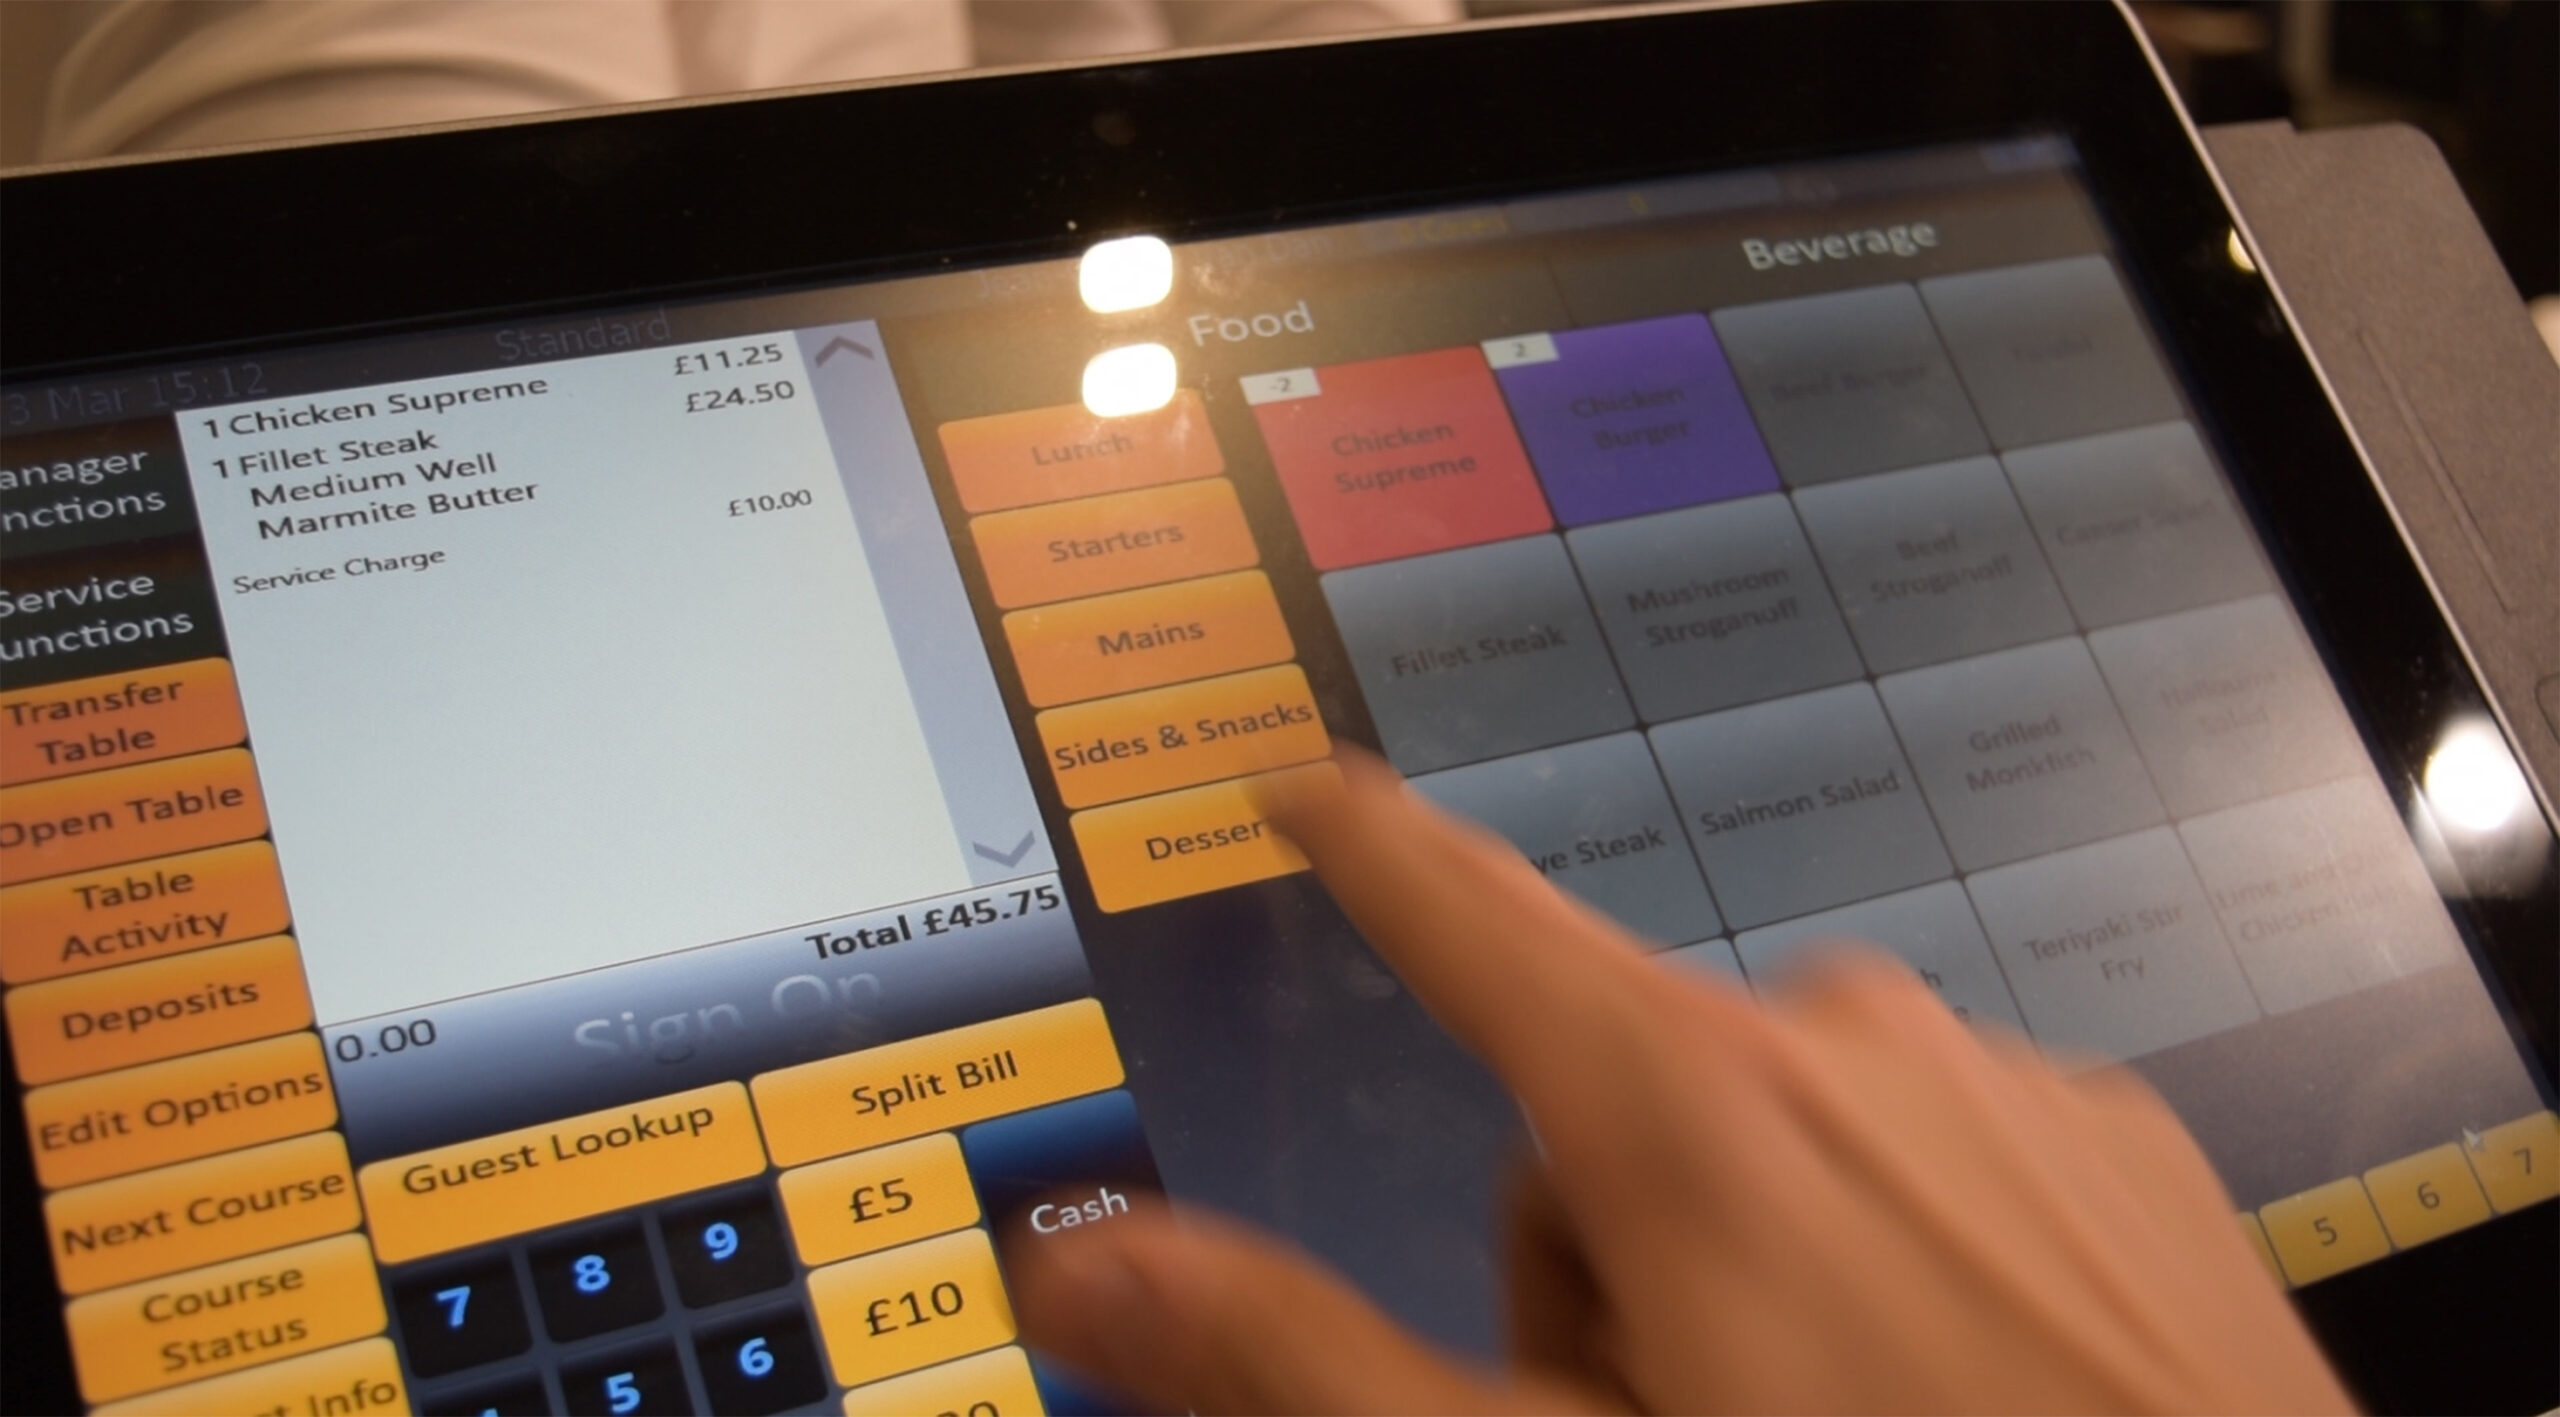 Tevalis EPOS system being used in the hospitality sector